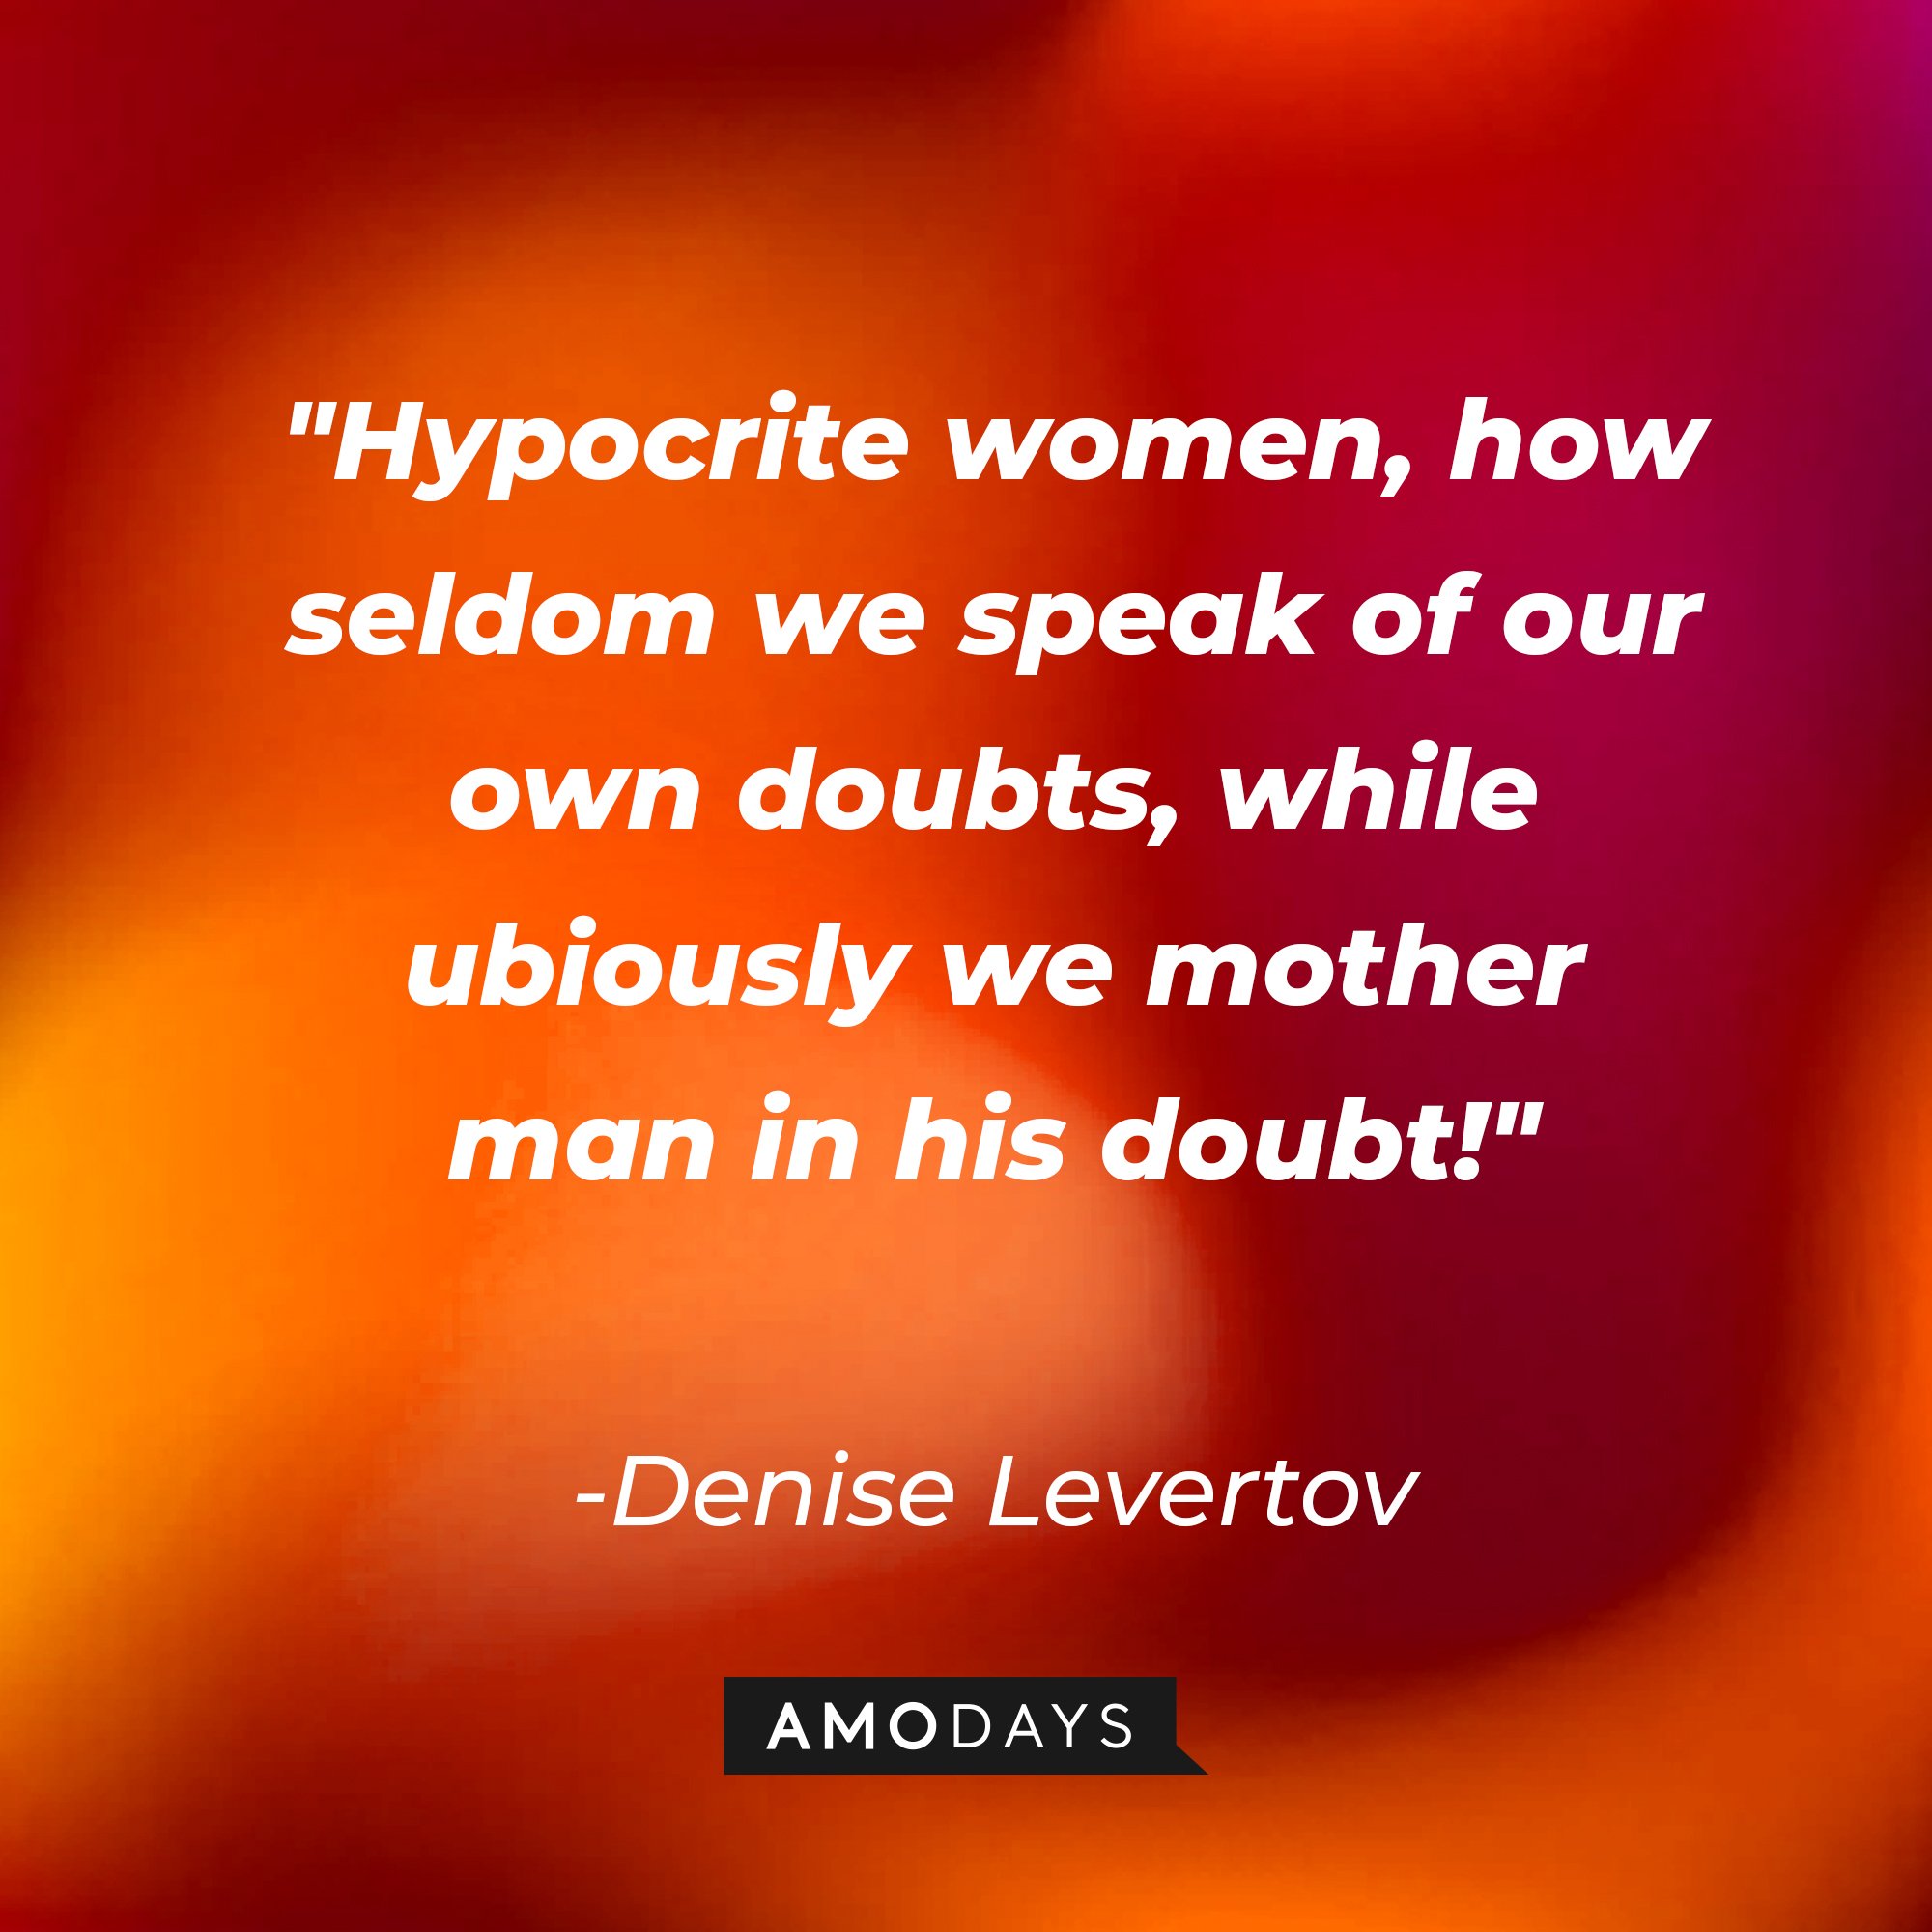 Denise Levertov's quote:\\\\\\\\\\\\\\\\u00a0"Hypocrite women, how seldom we speak of our own doubts, while dubiously we mother man in his doubt!"\\\\\\\\\\\\\\\\u00a0| Image: AmoDays